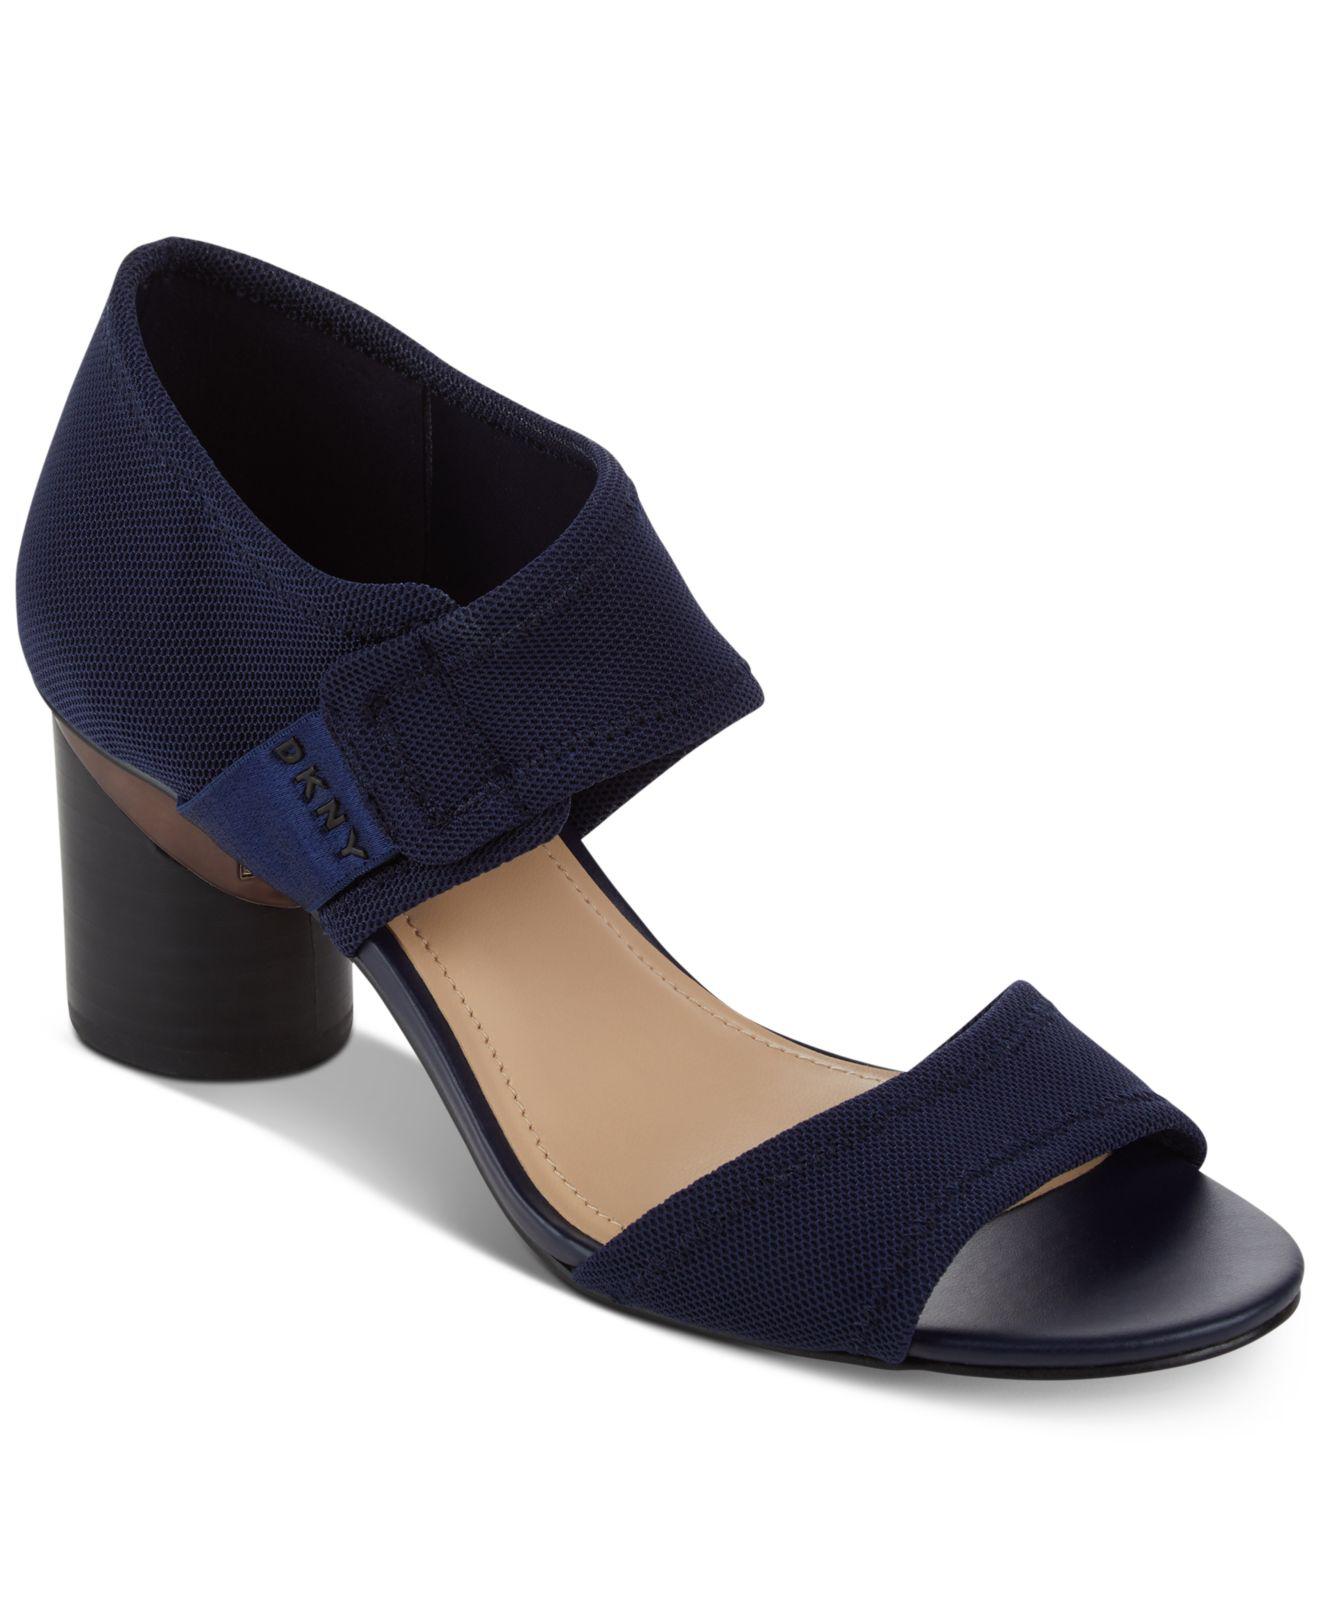 DKNY Penny Dress Sandals, Created For Macy's in Indigo (Blue) - Lyst